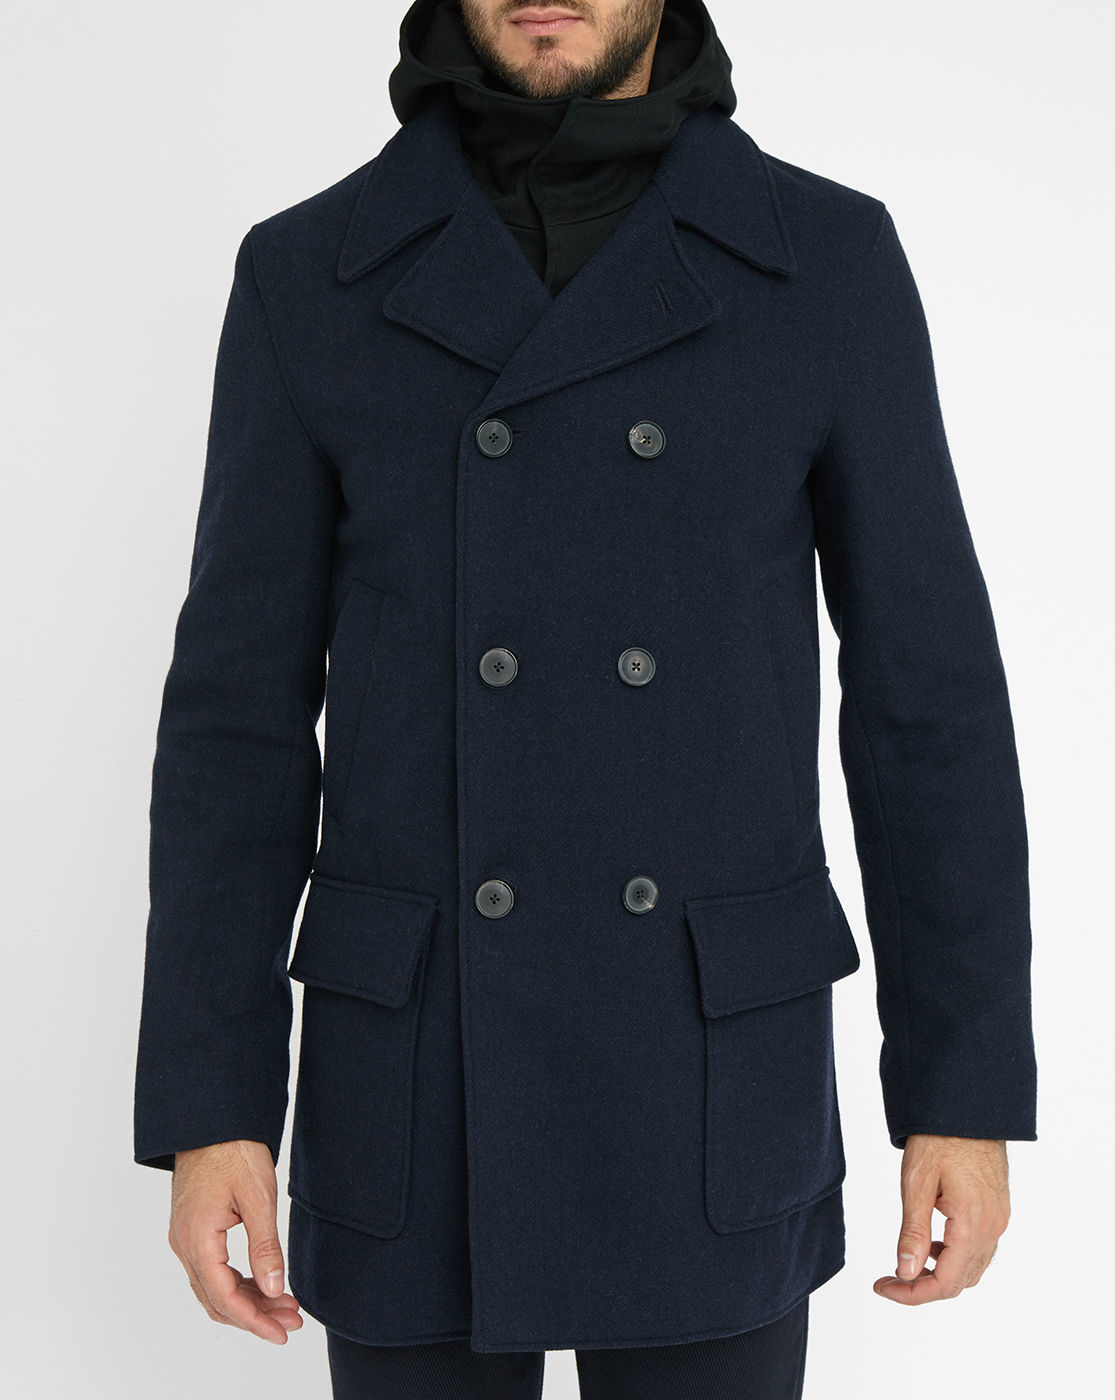 Acne Navy Melker Pea Coat With Contrasting Removable Hood And Liner in ...